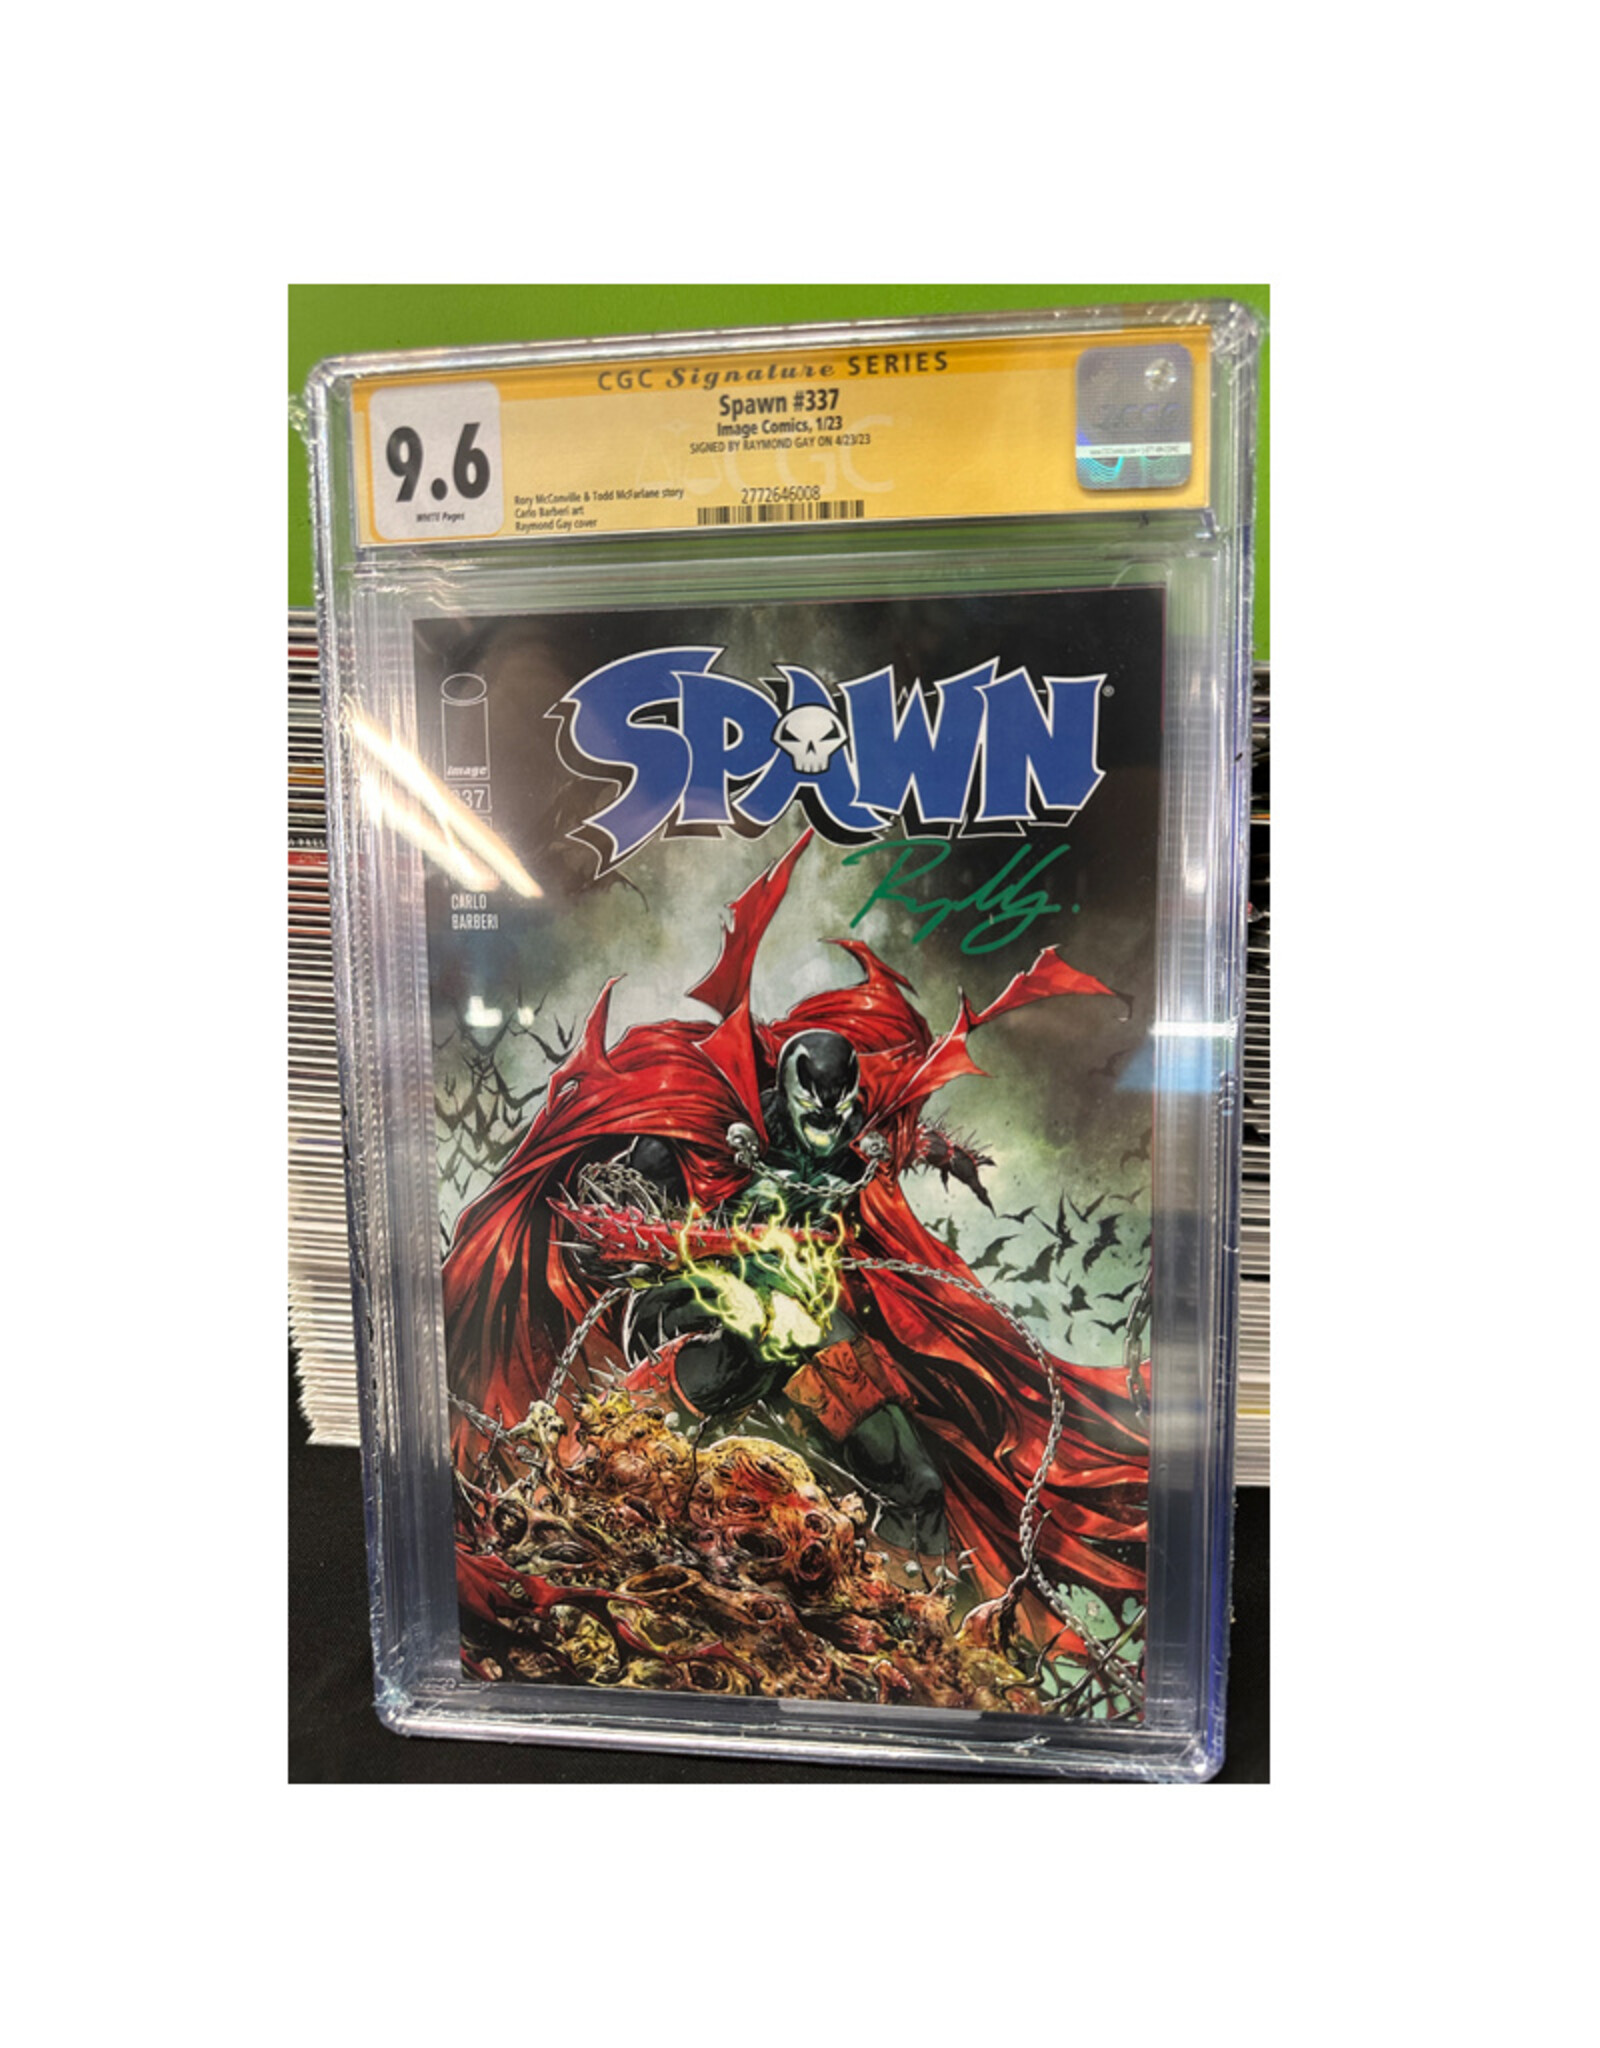 Image Comics Spawn #337 CGC Graded 9.6 Signed by Raymond Gay